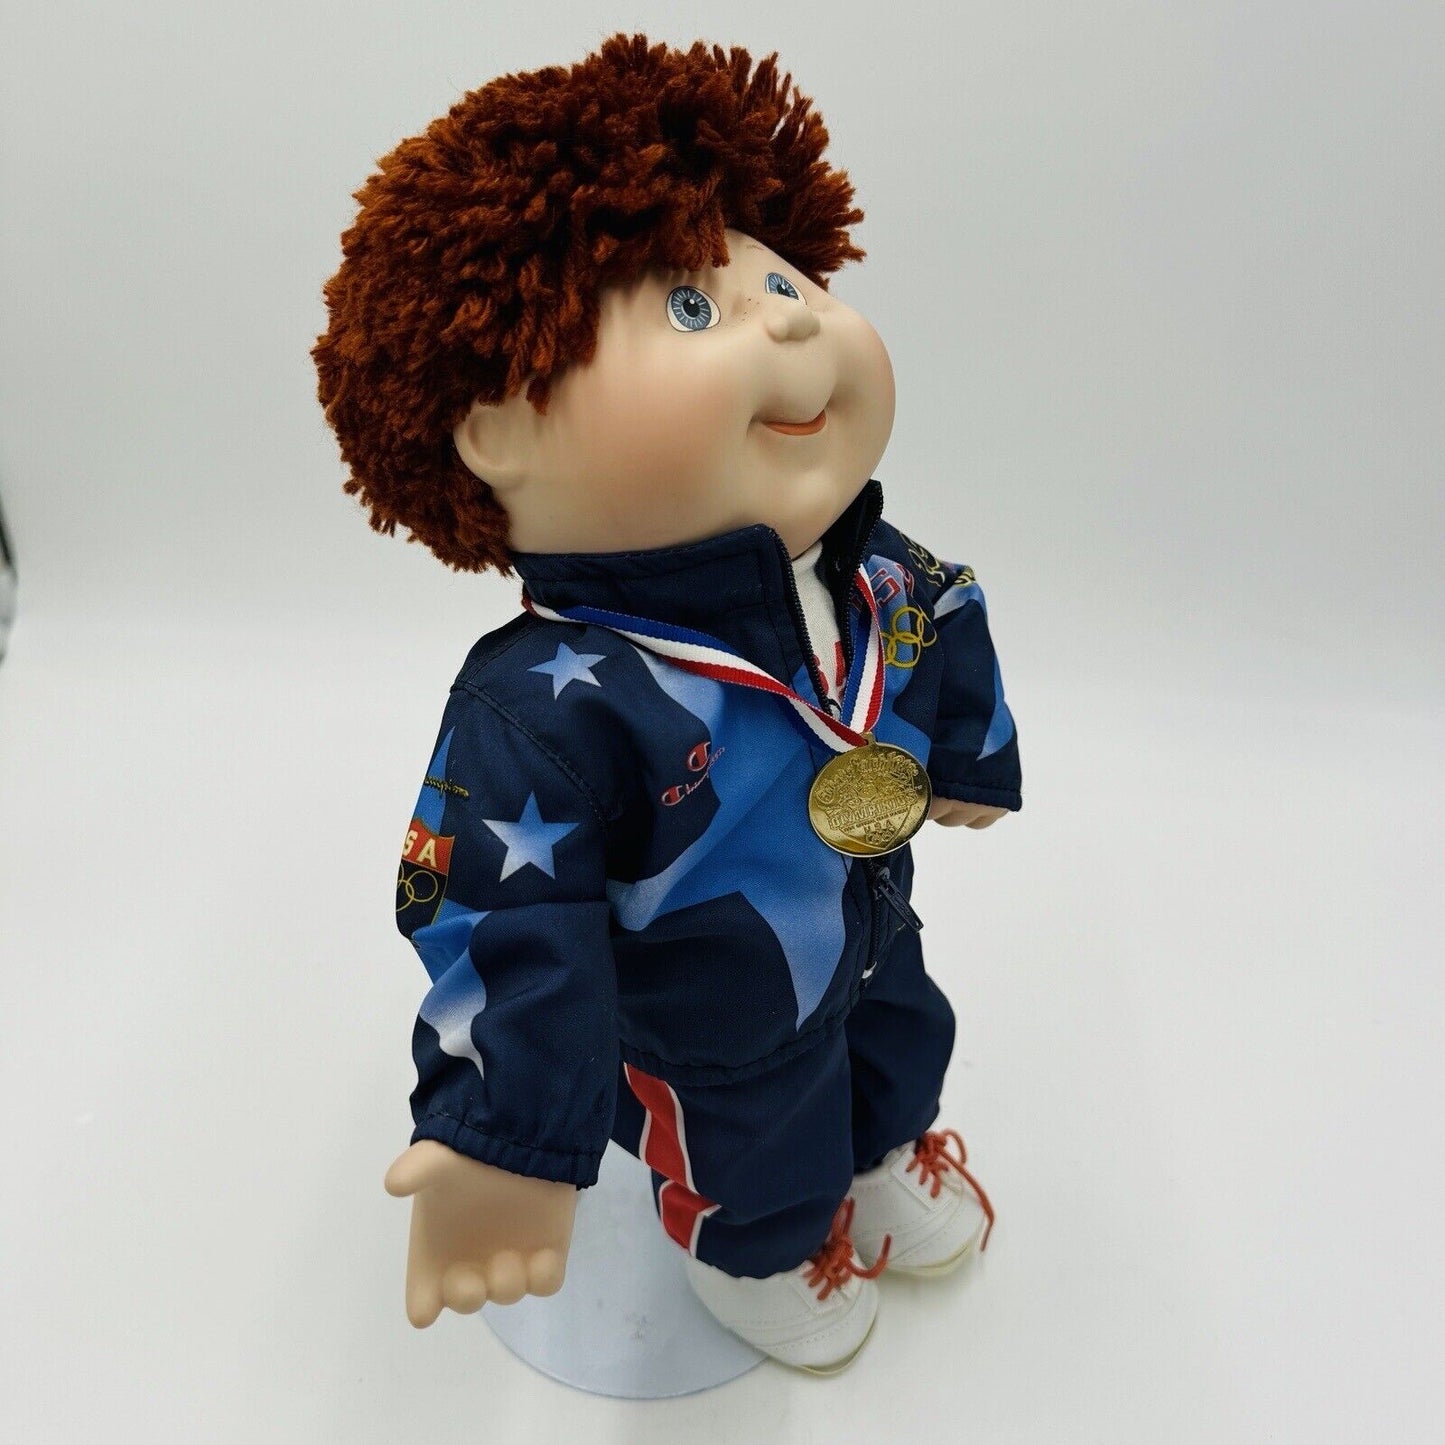 VTG 1996 Danbury Mint porcelain Doll Cabbage Patch 13” tall Olympic W/stand